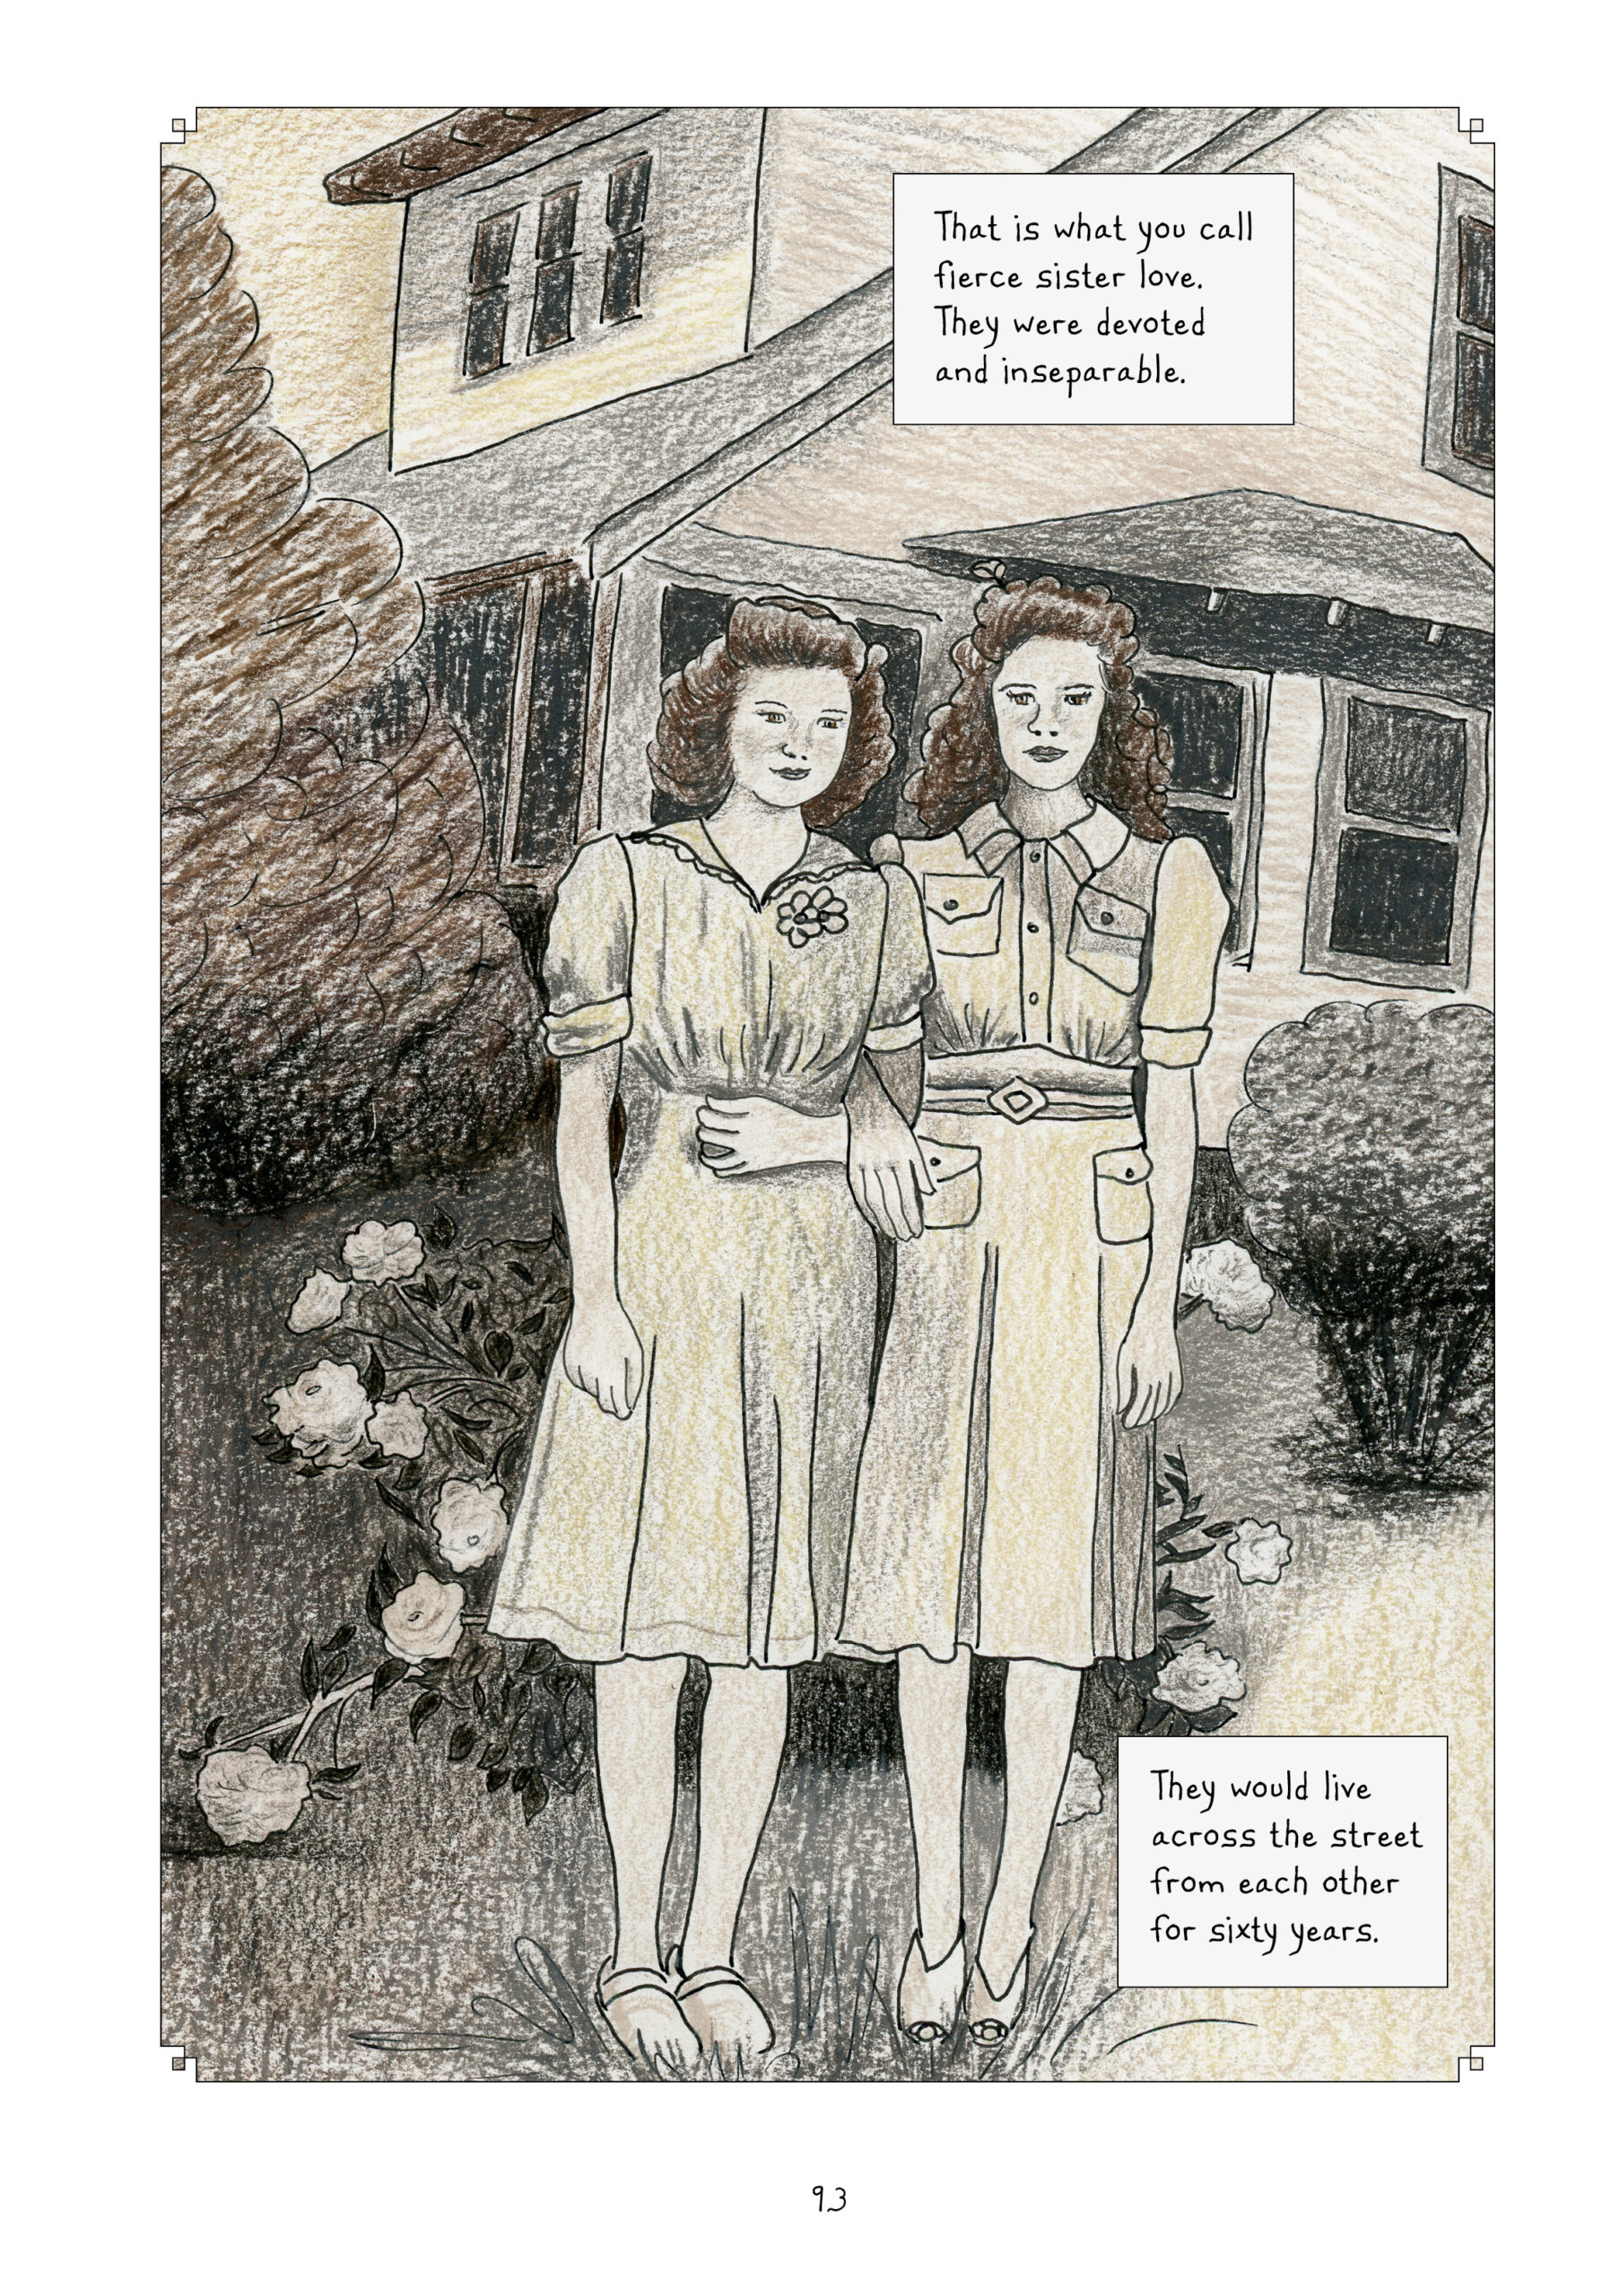 One photograph fills the page: two teenage-looking girls, Lorraine and Doris, stand with arms locked together, facing the camera with neutral expressions. They are outside in the yard of a two-story house with bushes and white roses. They are both wearing knee-length dresses with elbow-length sleeves, each a different with varying details. Doris, to the left, has dark curly about an inch above her shoulders; Lorraineâ€™s hair is longer, past her shoulders, but just as dark and curly. Lynn narrates, â€œThat is what you call fierce sister love. They were devoted and inseparable. They would live across the street from each other for sixty years.â€